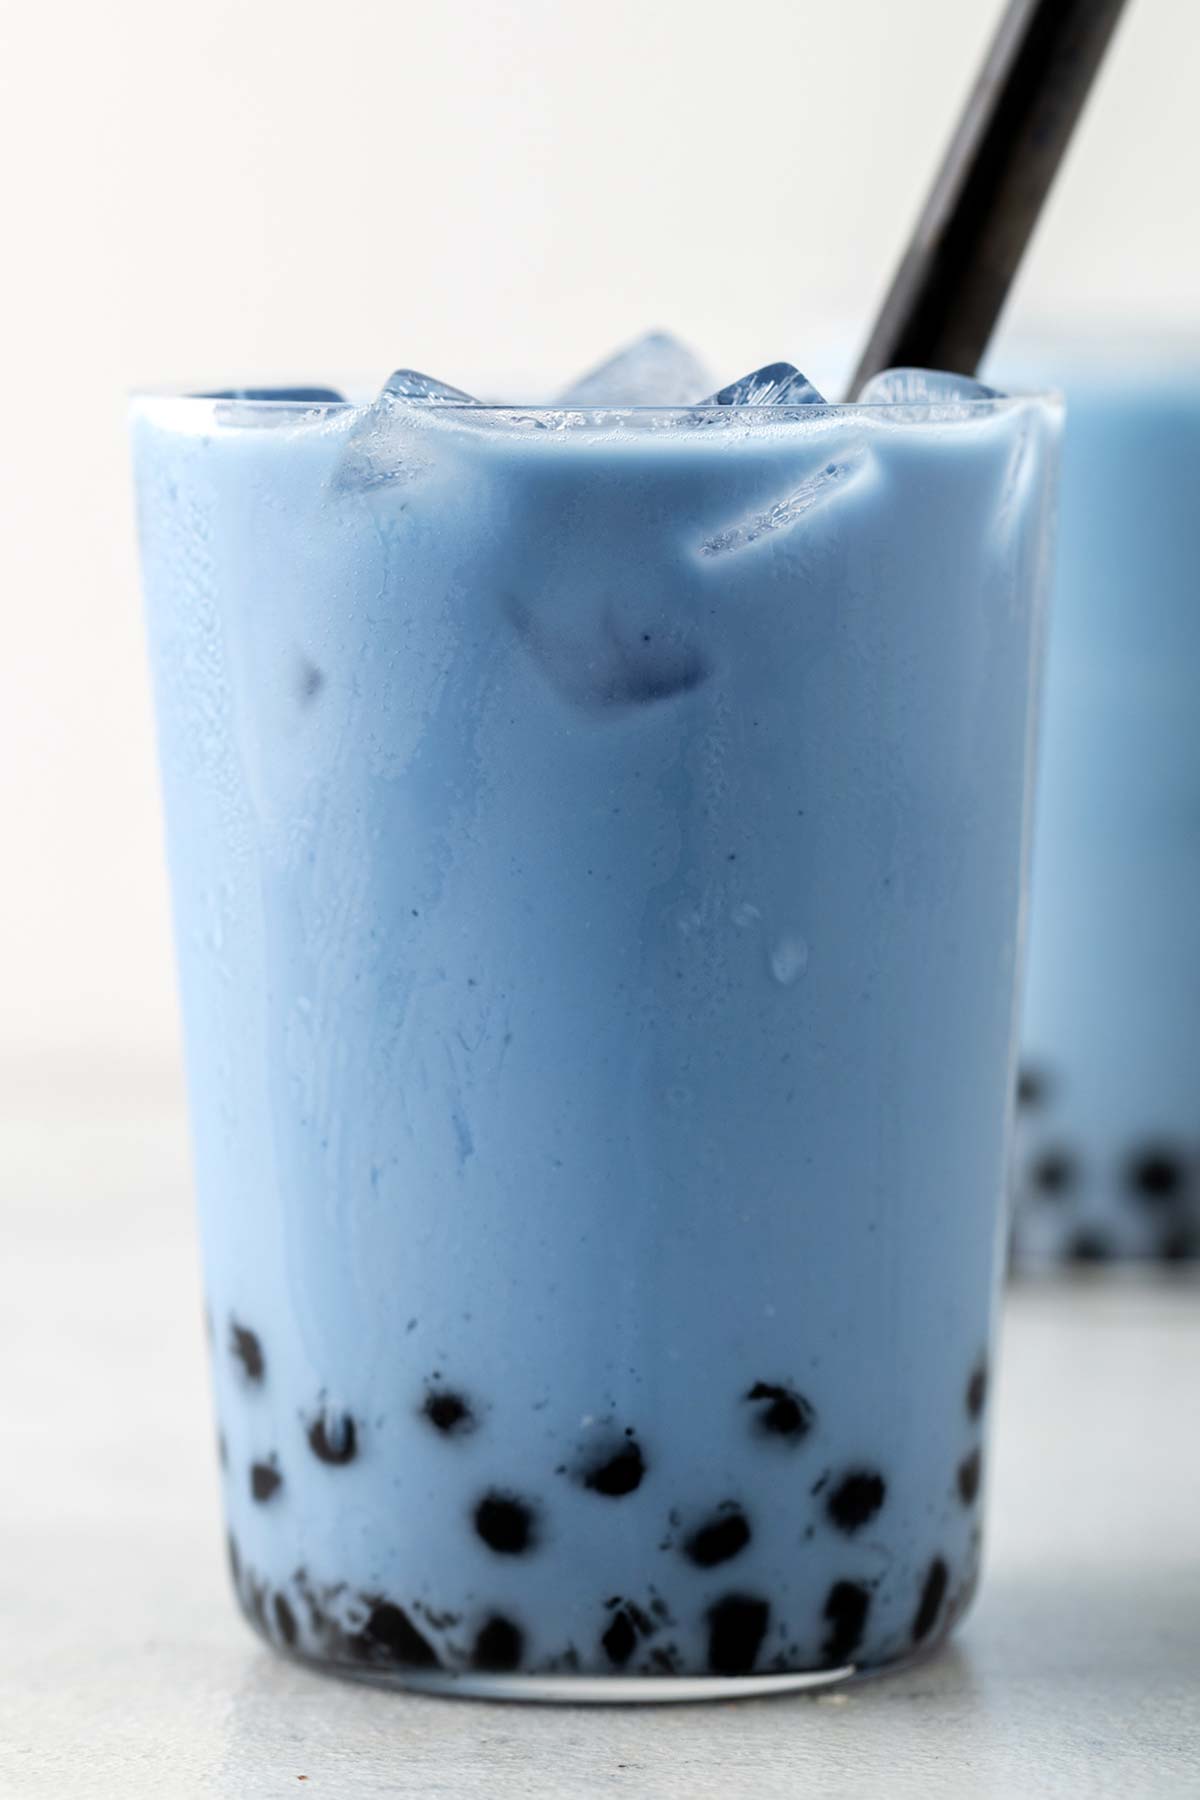 Butterfly Pea Flower Bubble Tea (Butterfly Pea Flower Milk Tea with Boba) fully assembled and solid blue color drink with boba at the bottom and ice on top.